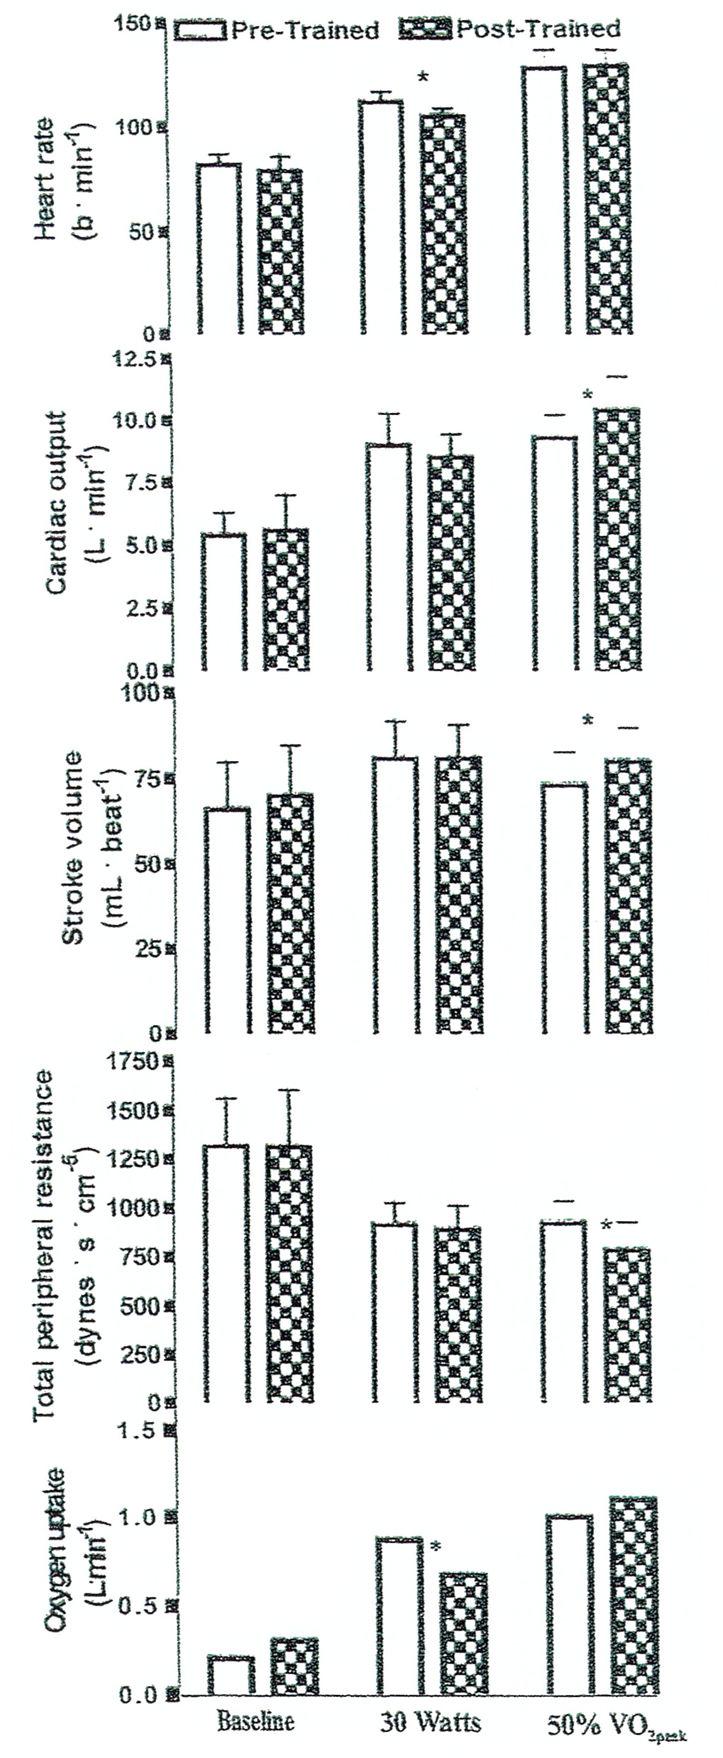 Bond et al. Page 8 Fig 2. Cardiovascular Responses to Exercise Training.